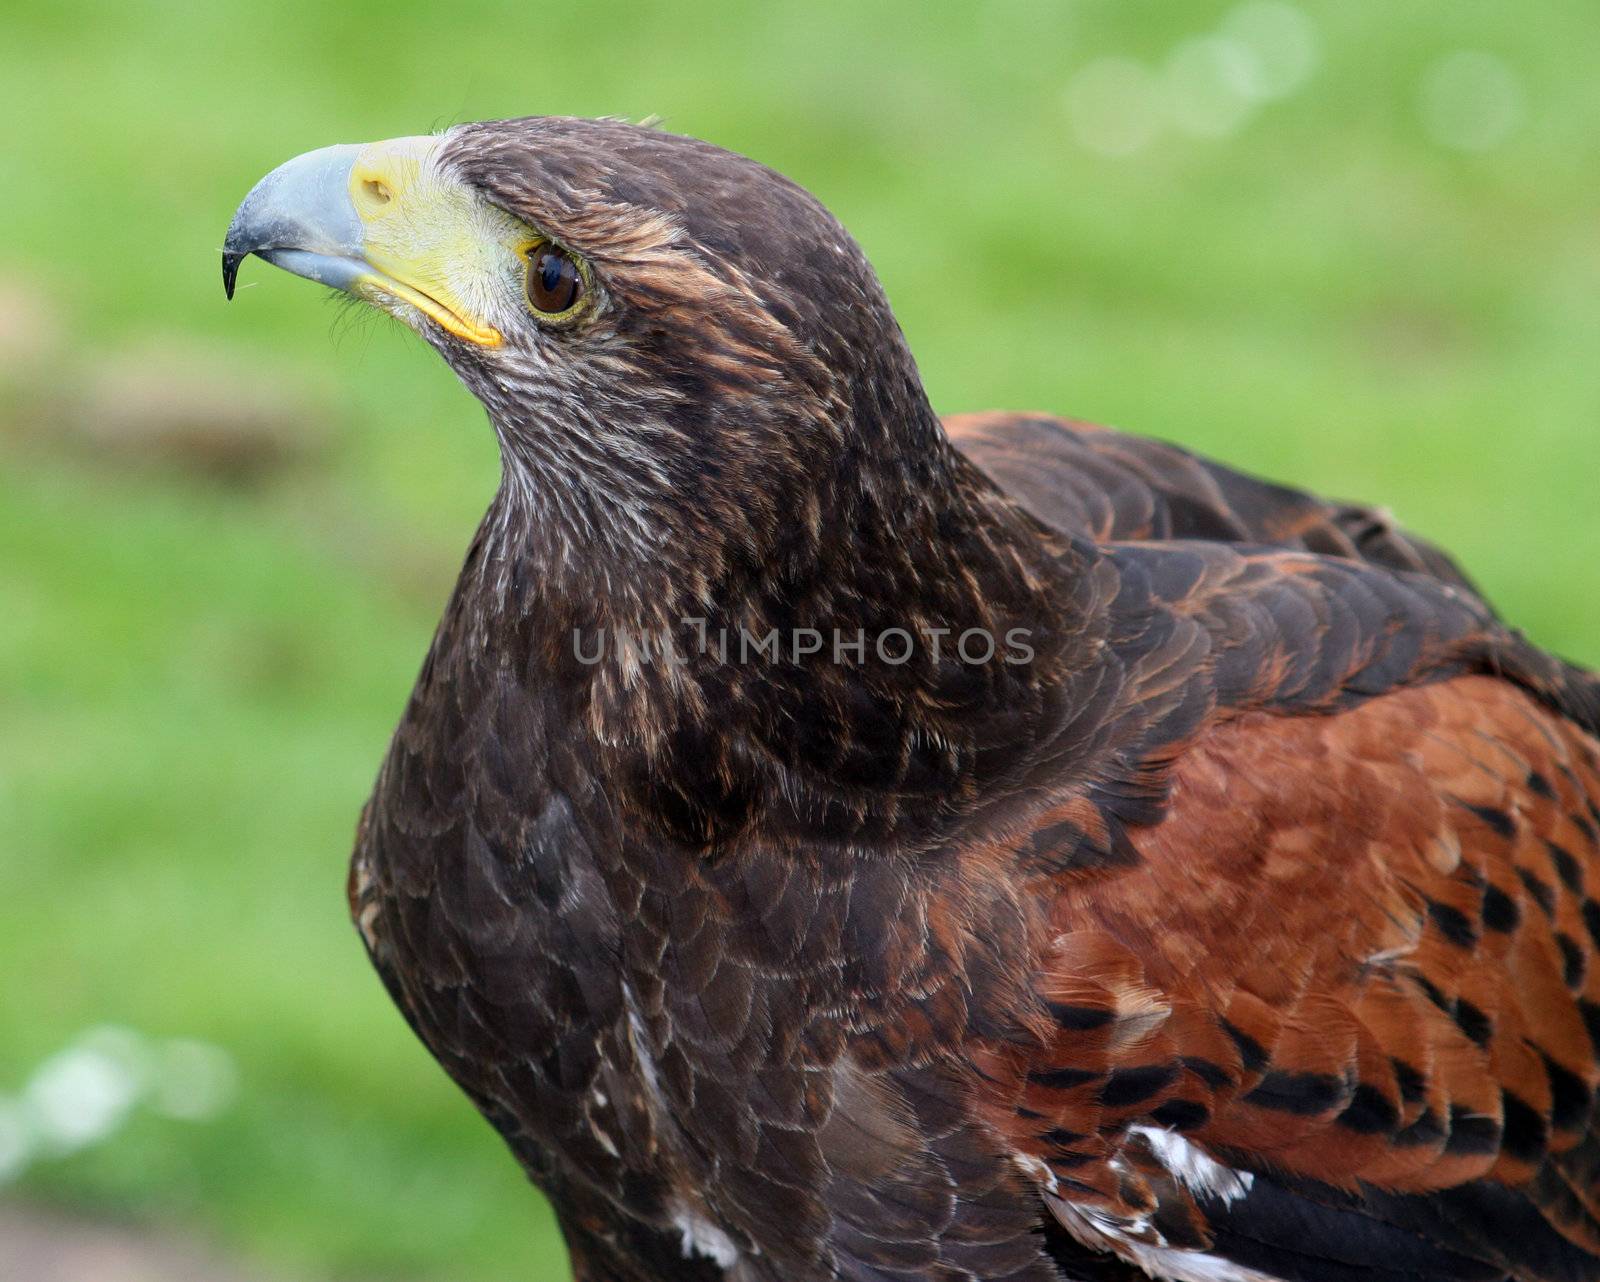 A Harris hawk stares regally out